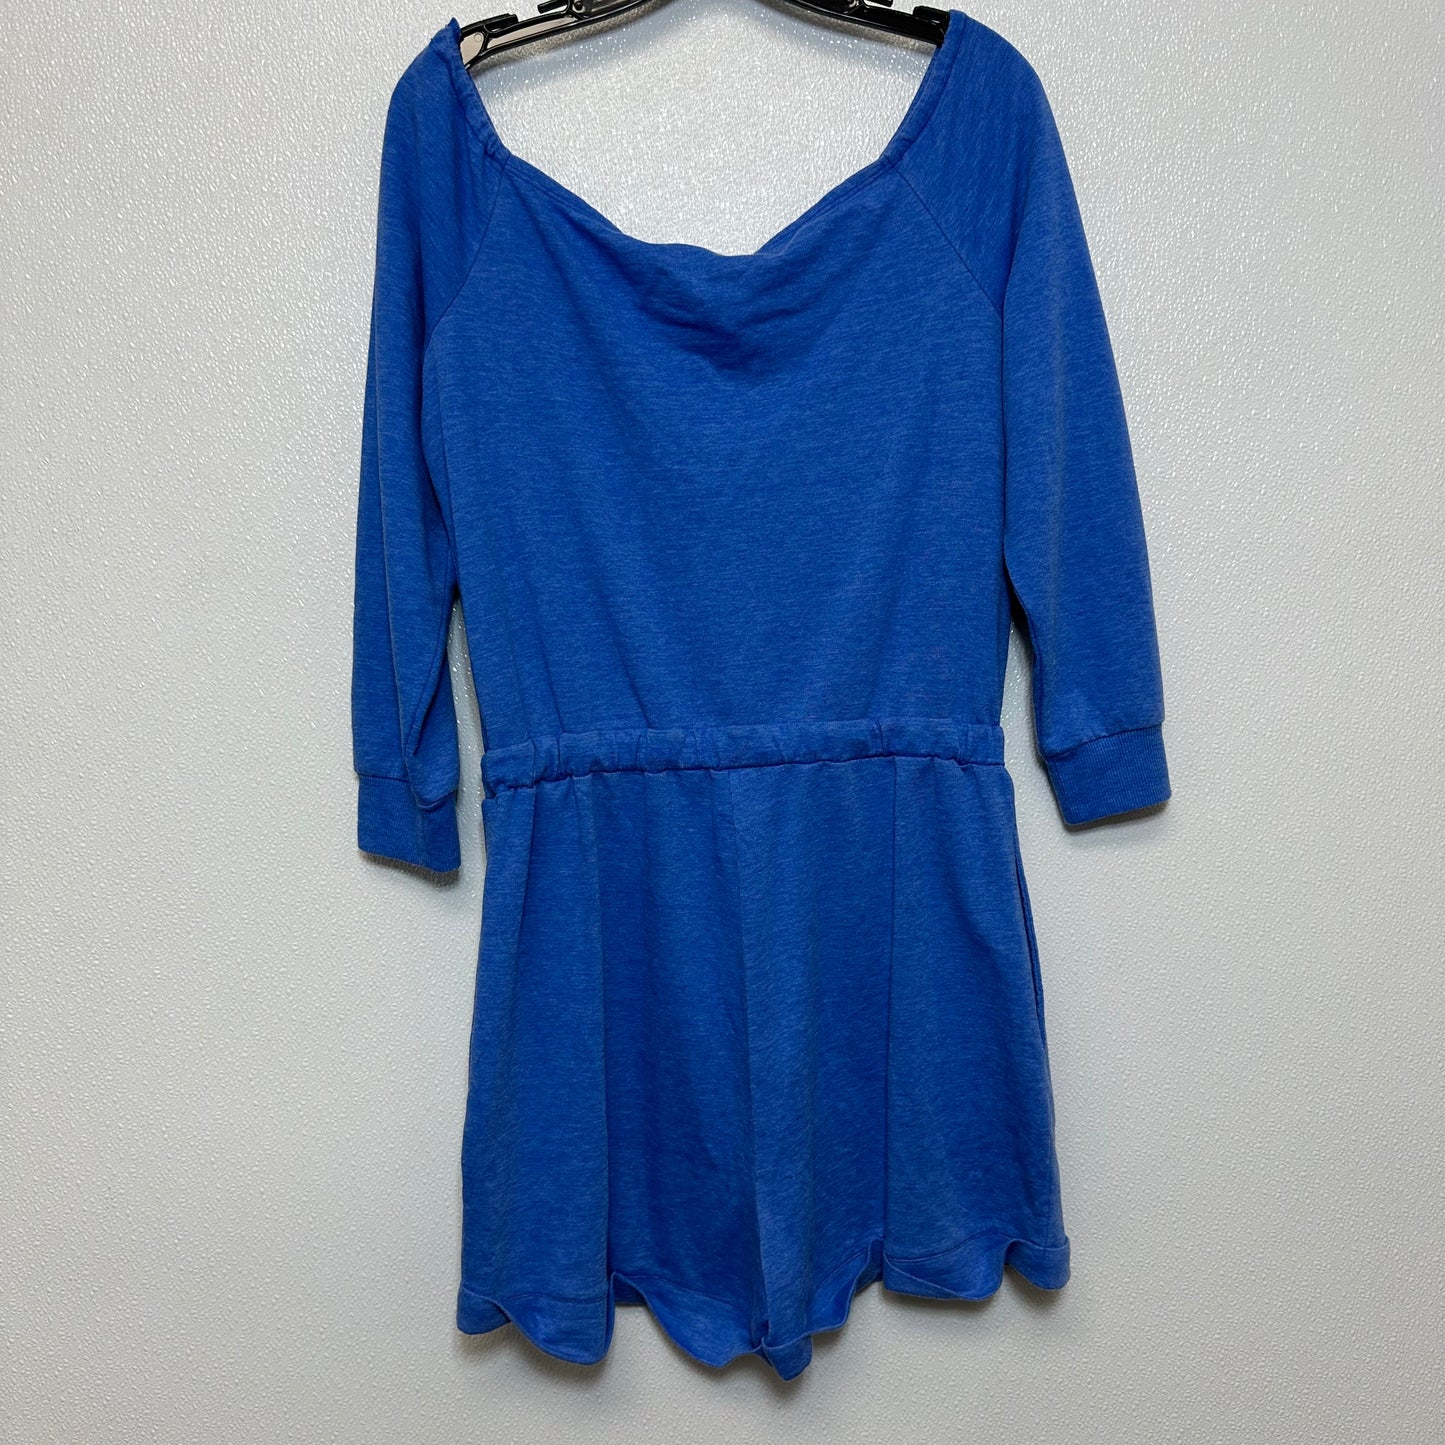 Romper By Bcbgeneration  Size: M